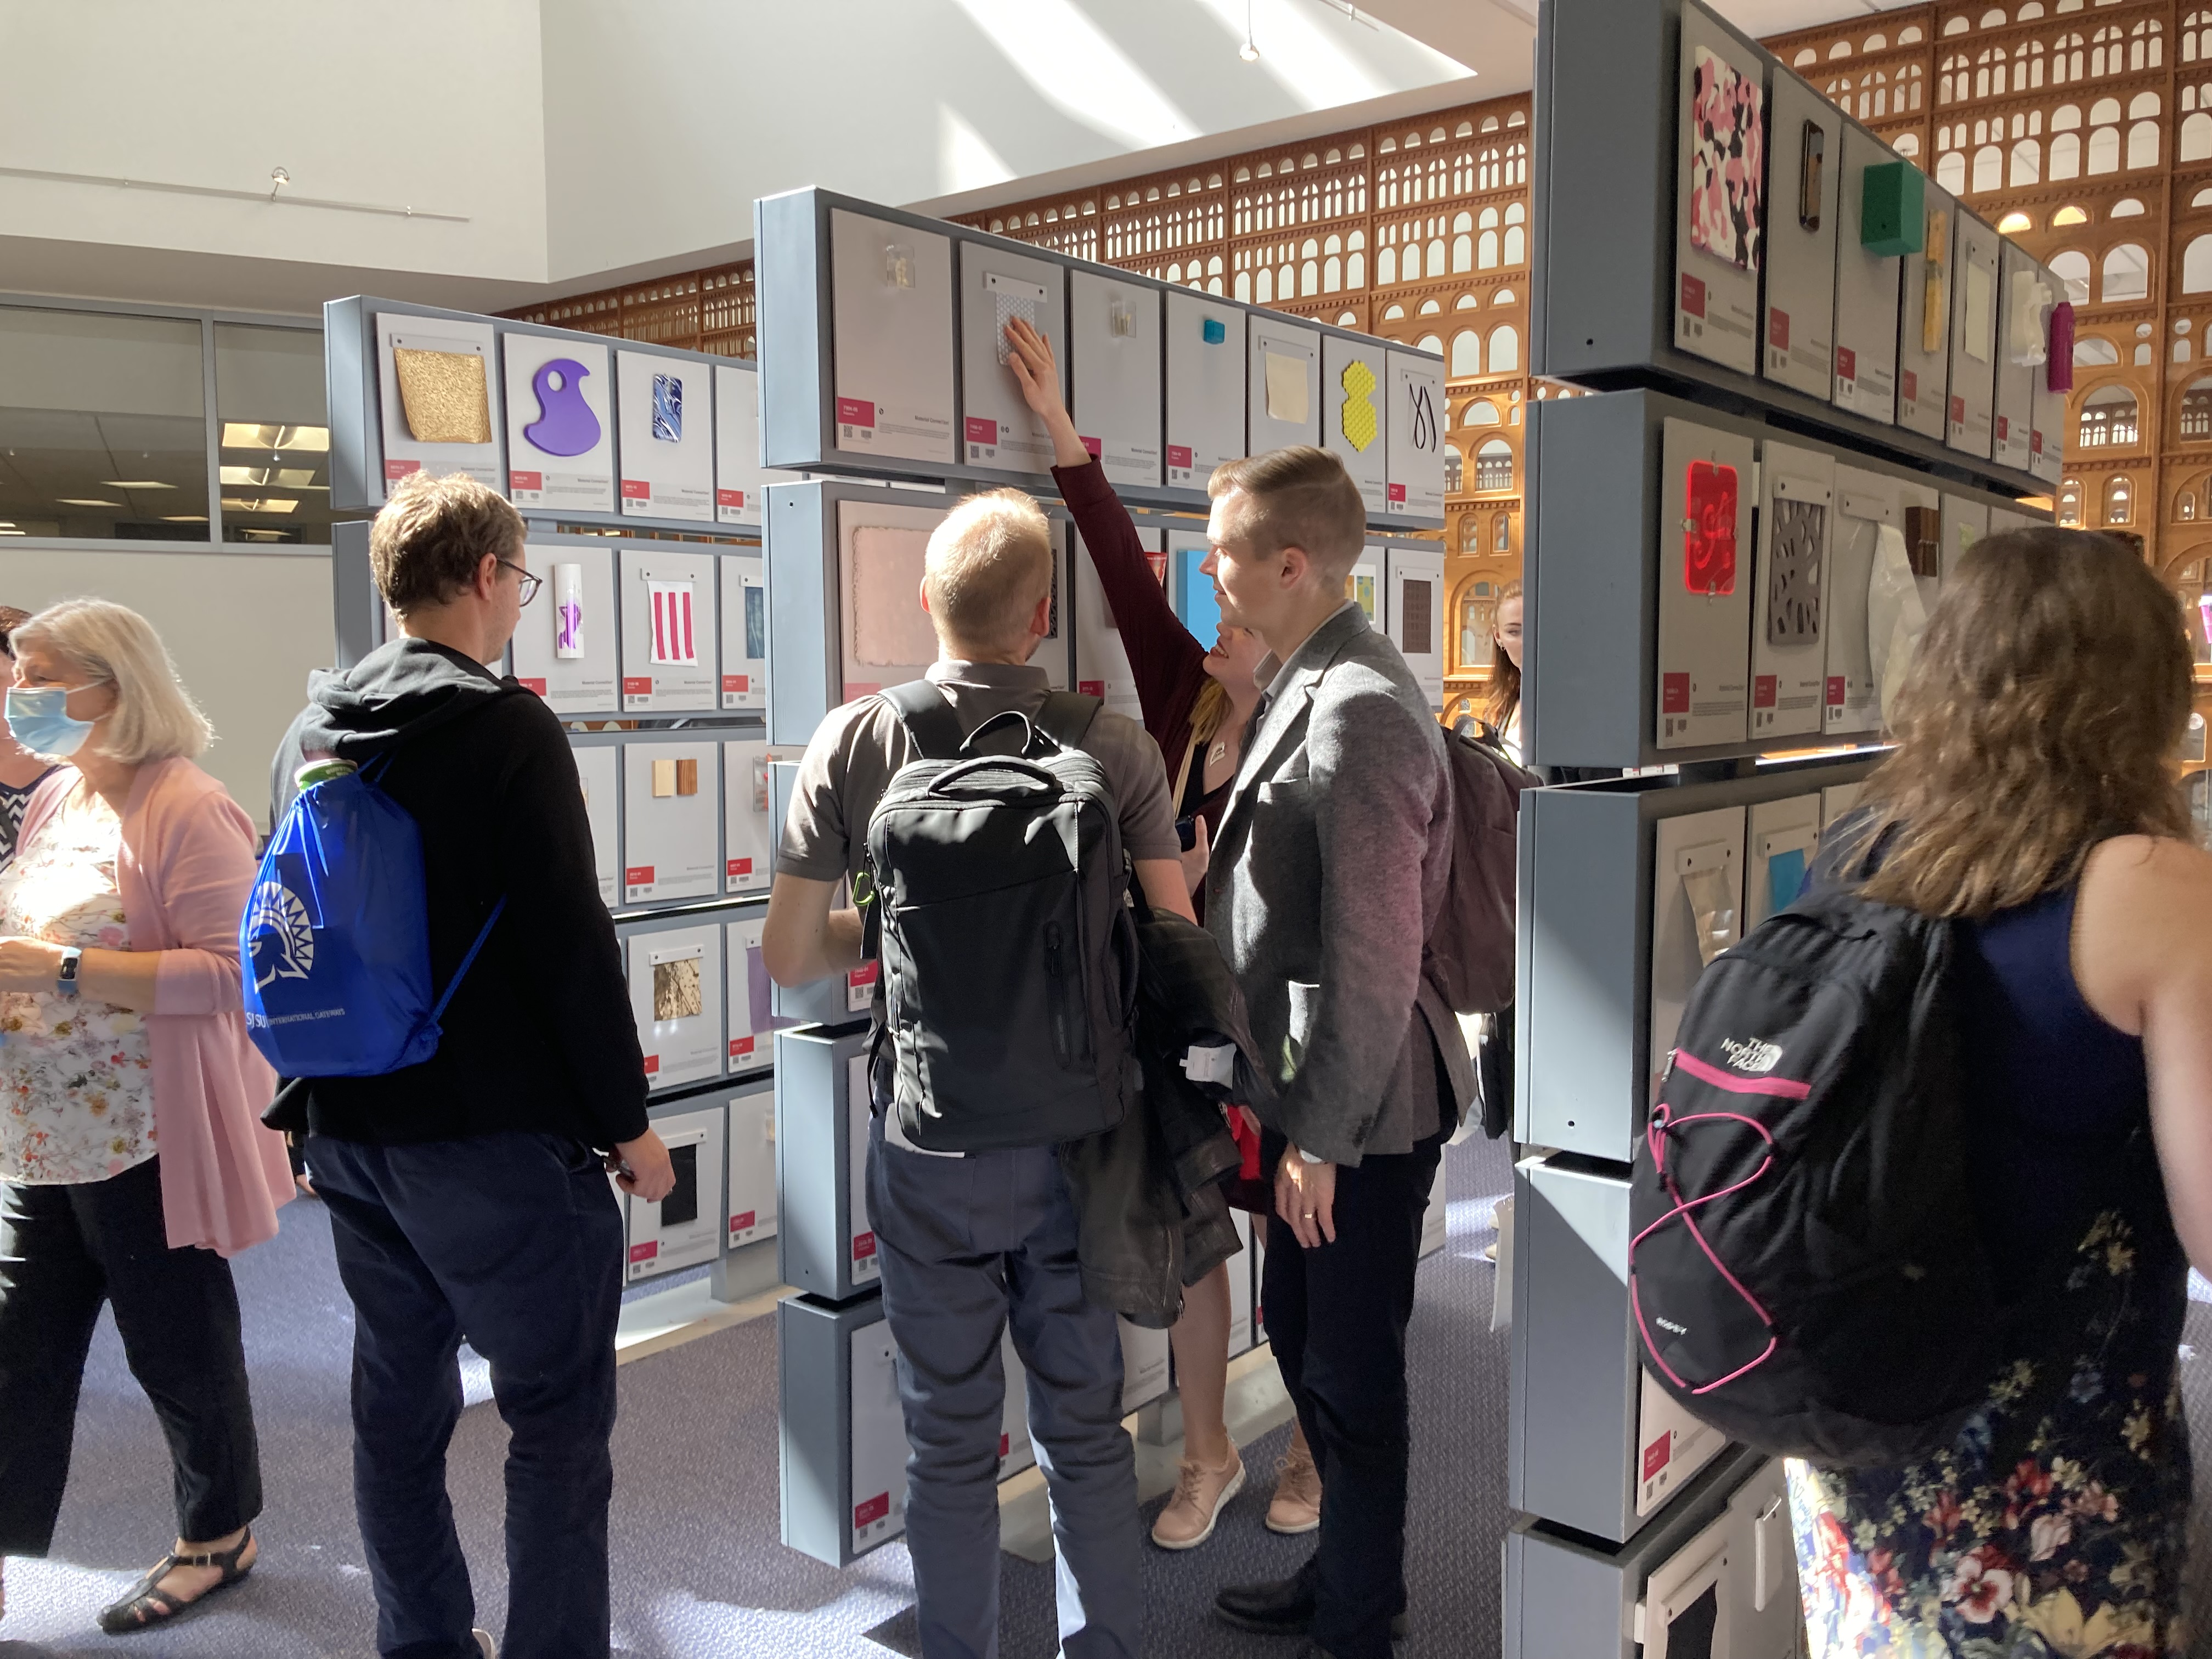 Three male students and one female stand in front of a panel of squares, each with a 4' scrap of plastic, fabric, or other material in SJSU's Materials Library.  A staff member with gray hair and a pink sweater walks away in the background, while a woman with a background walks to the right in the foreground.